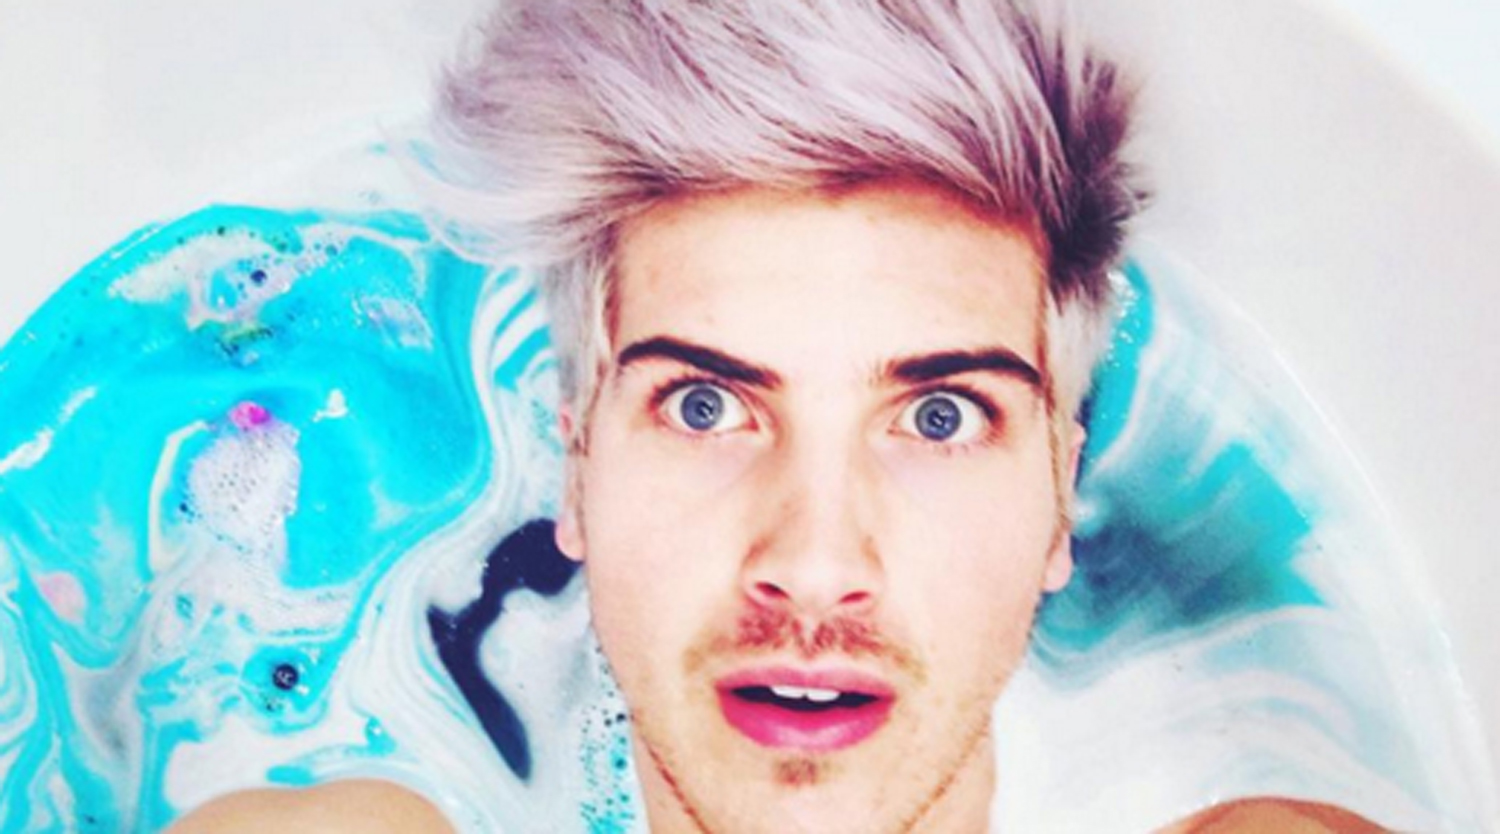 YouTube’s Joey Graceffa is Feeling Very Blue These Days.